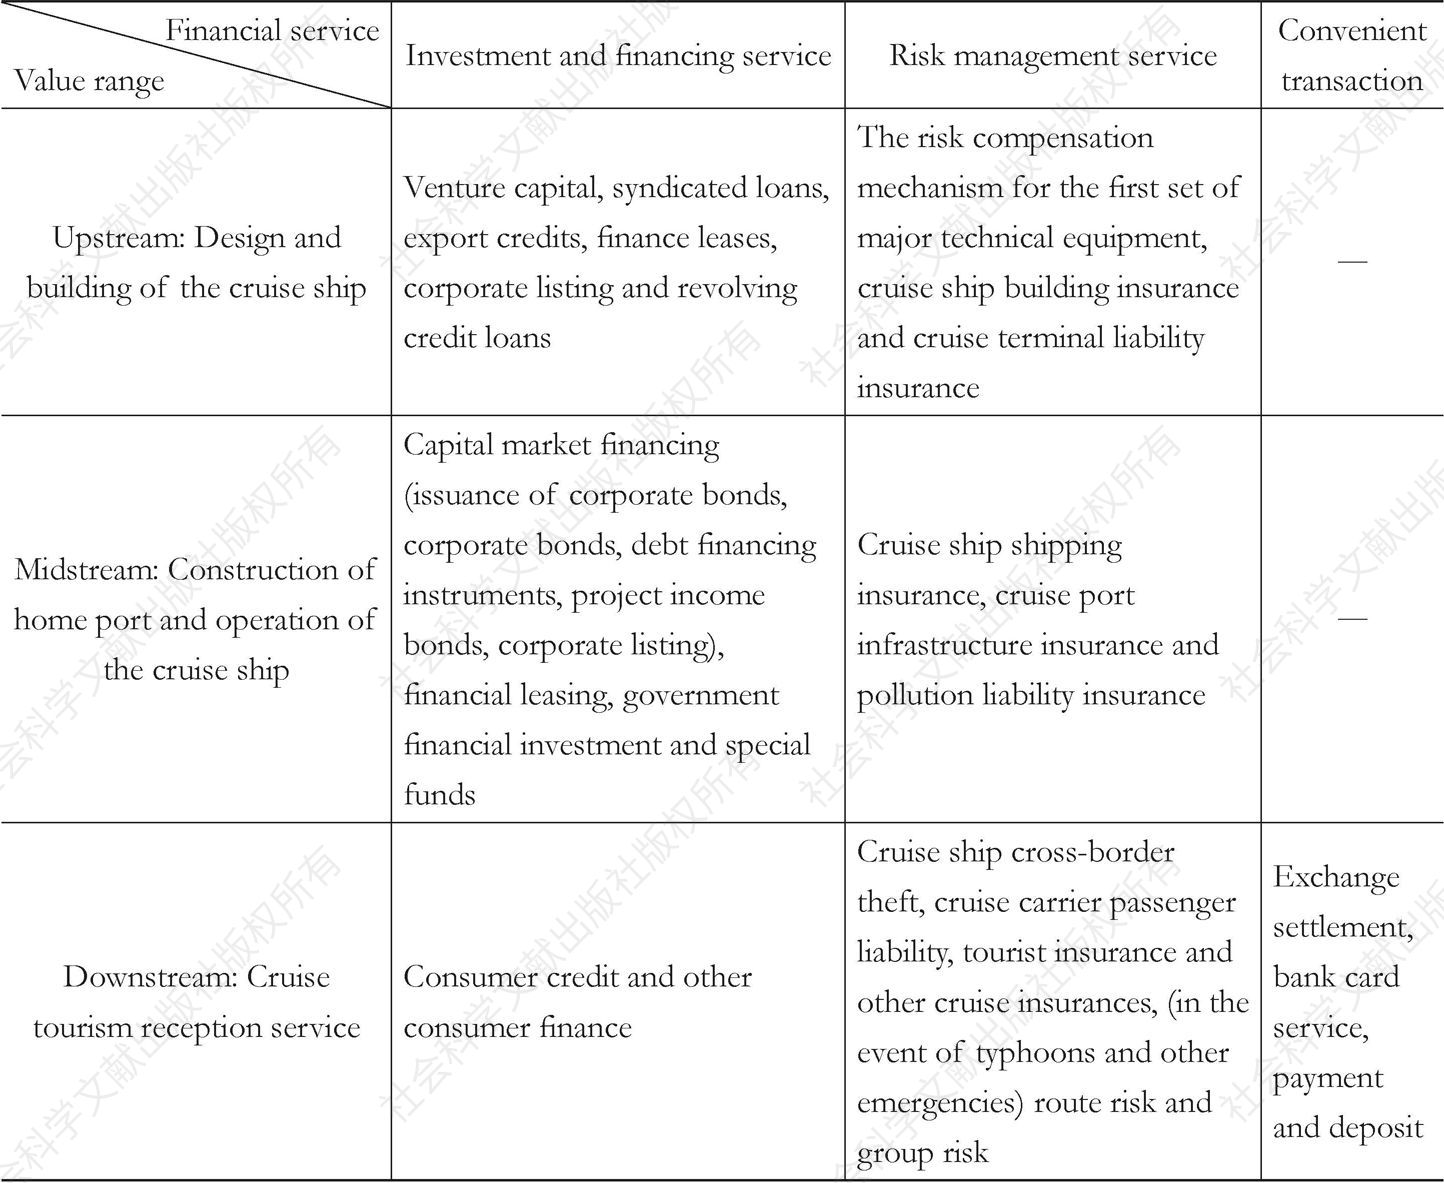 Fig. 2 “Nine-grid Pattern” for Connotation of Financial Service System for Development of the Cruise Industry